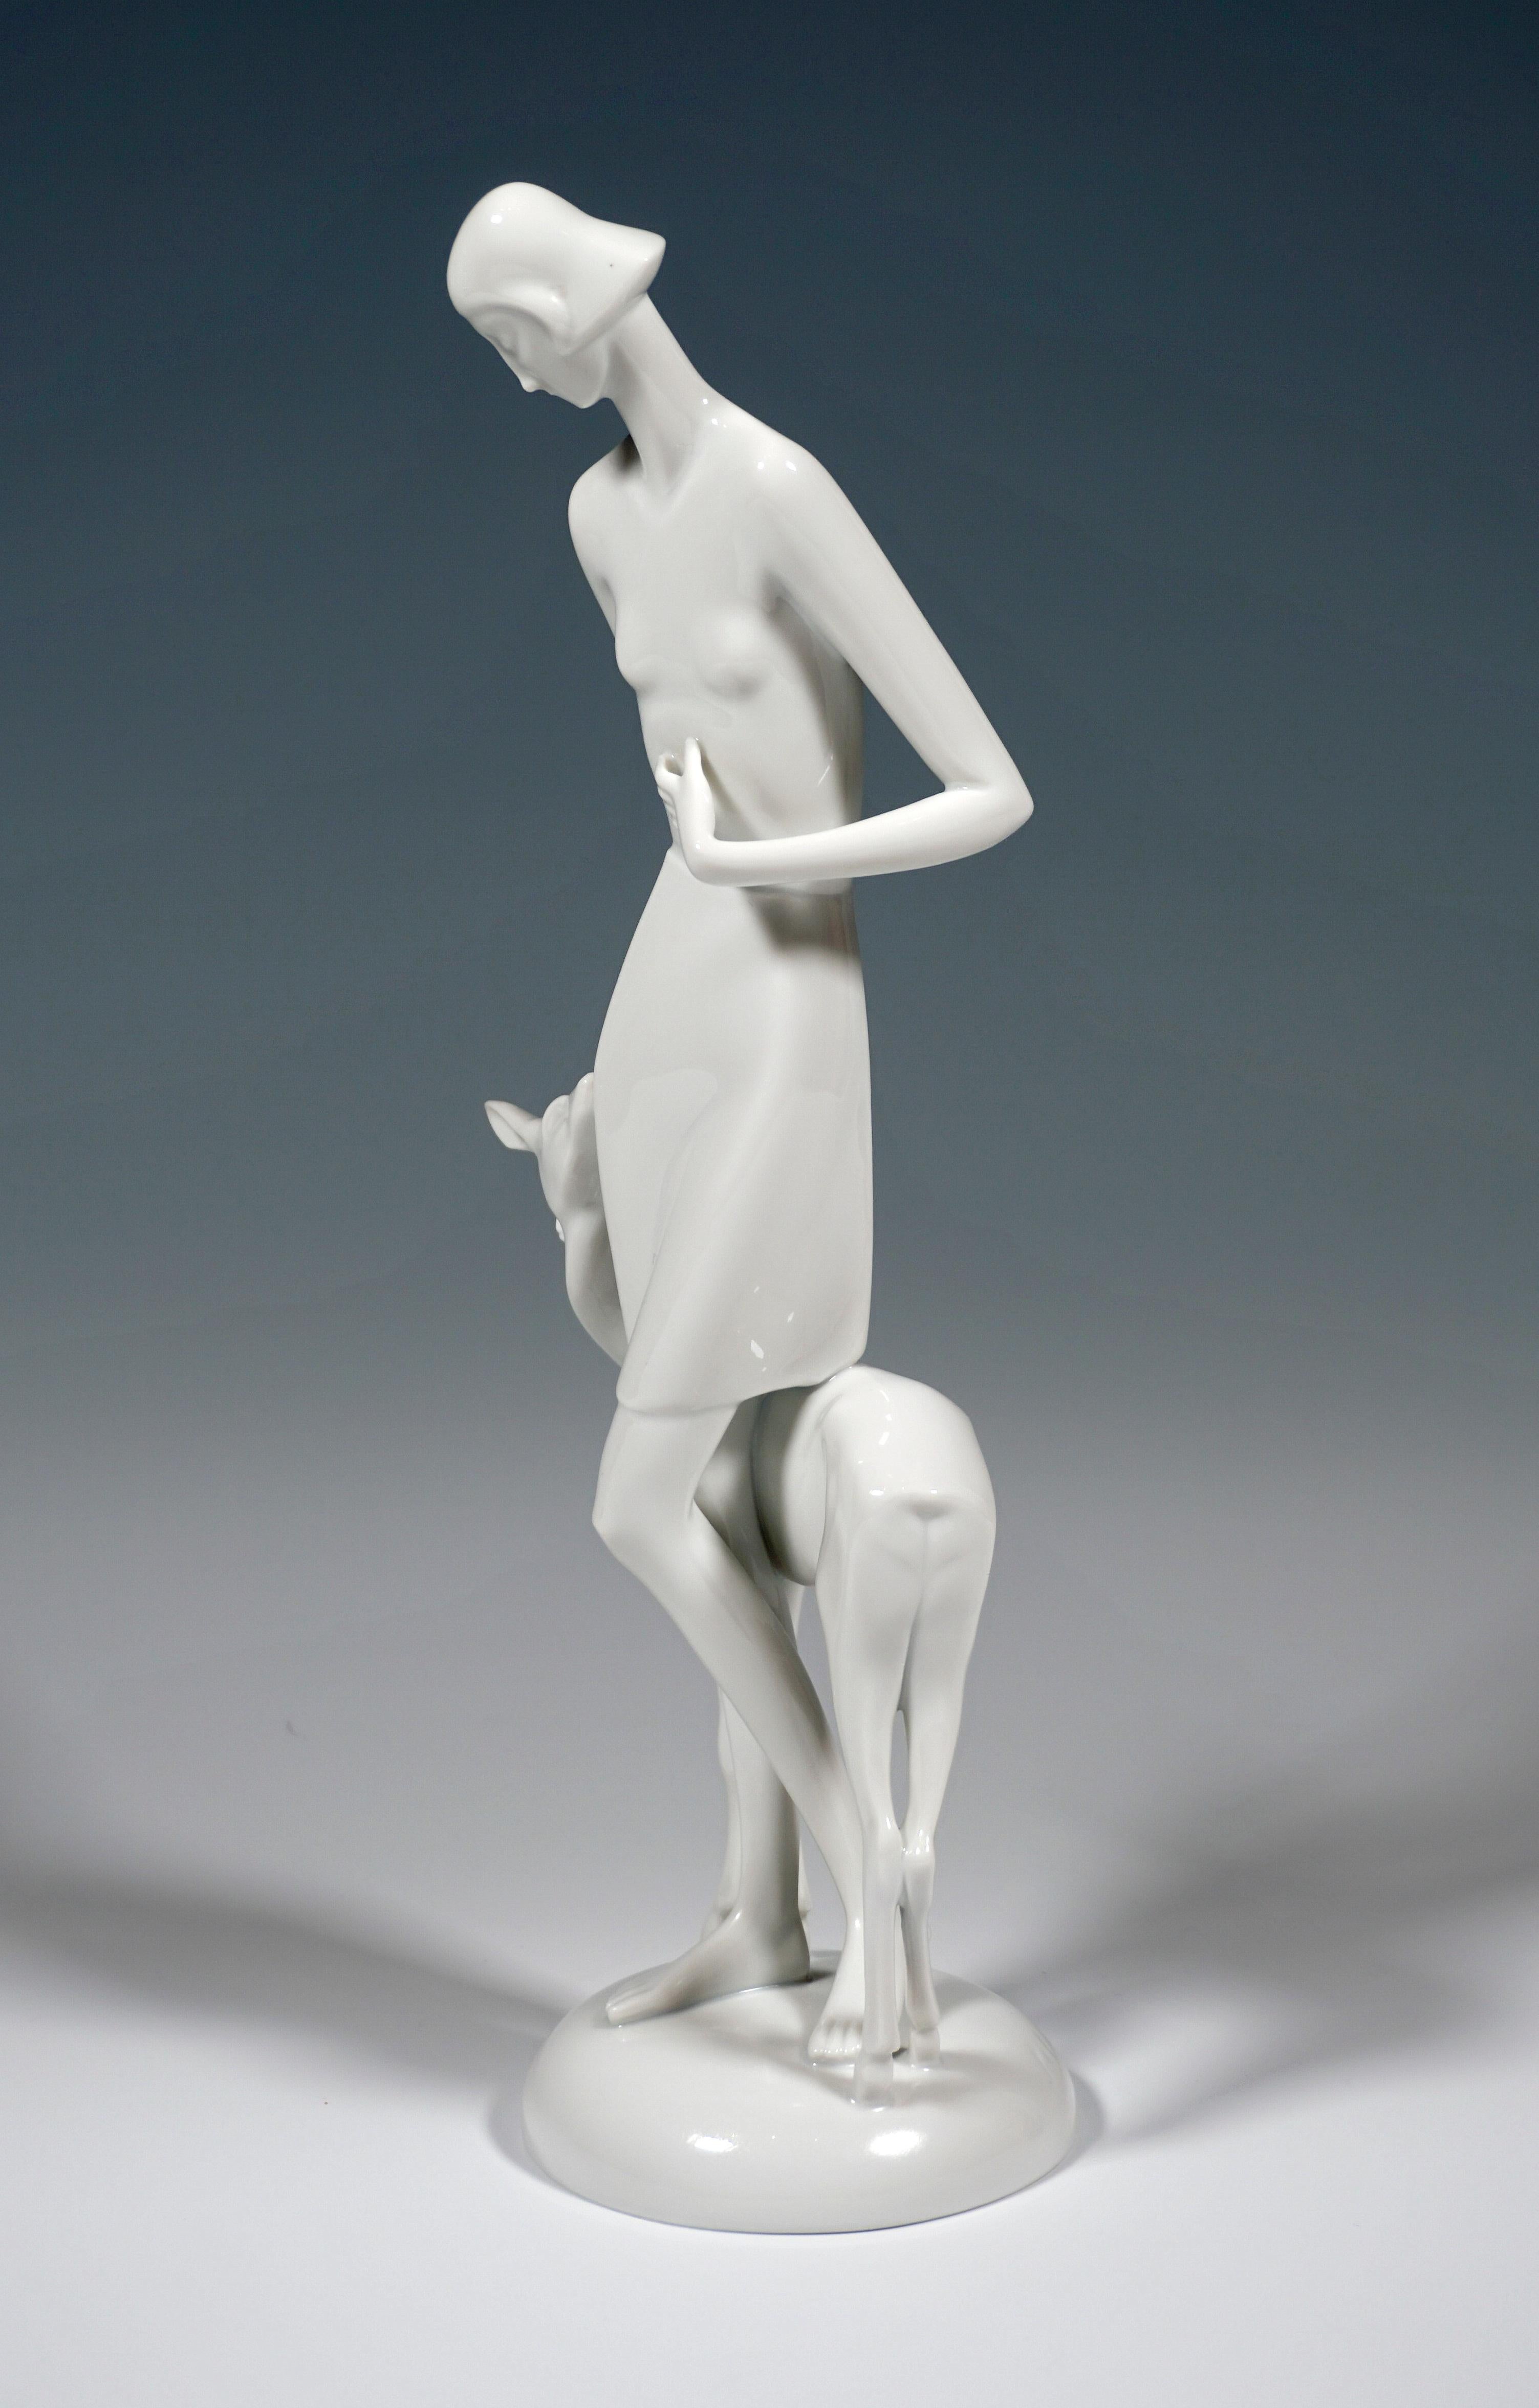 Hand-Crafted Art Déco Porcelain Figure 'Girl With Deer' by Schliepstein, Rosenthal Germany